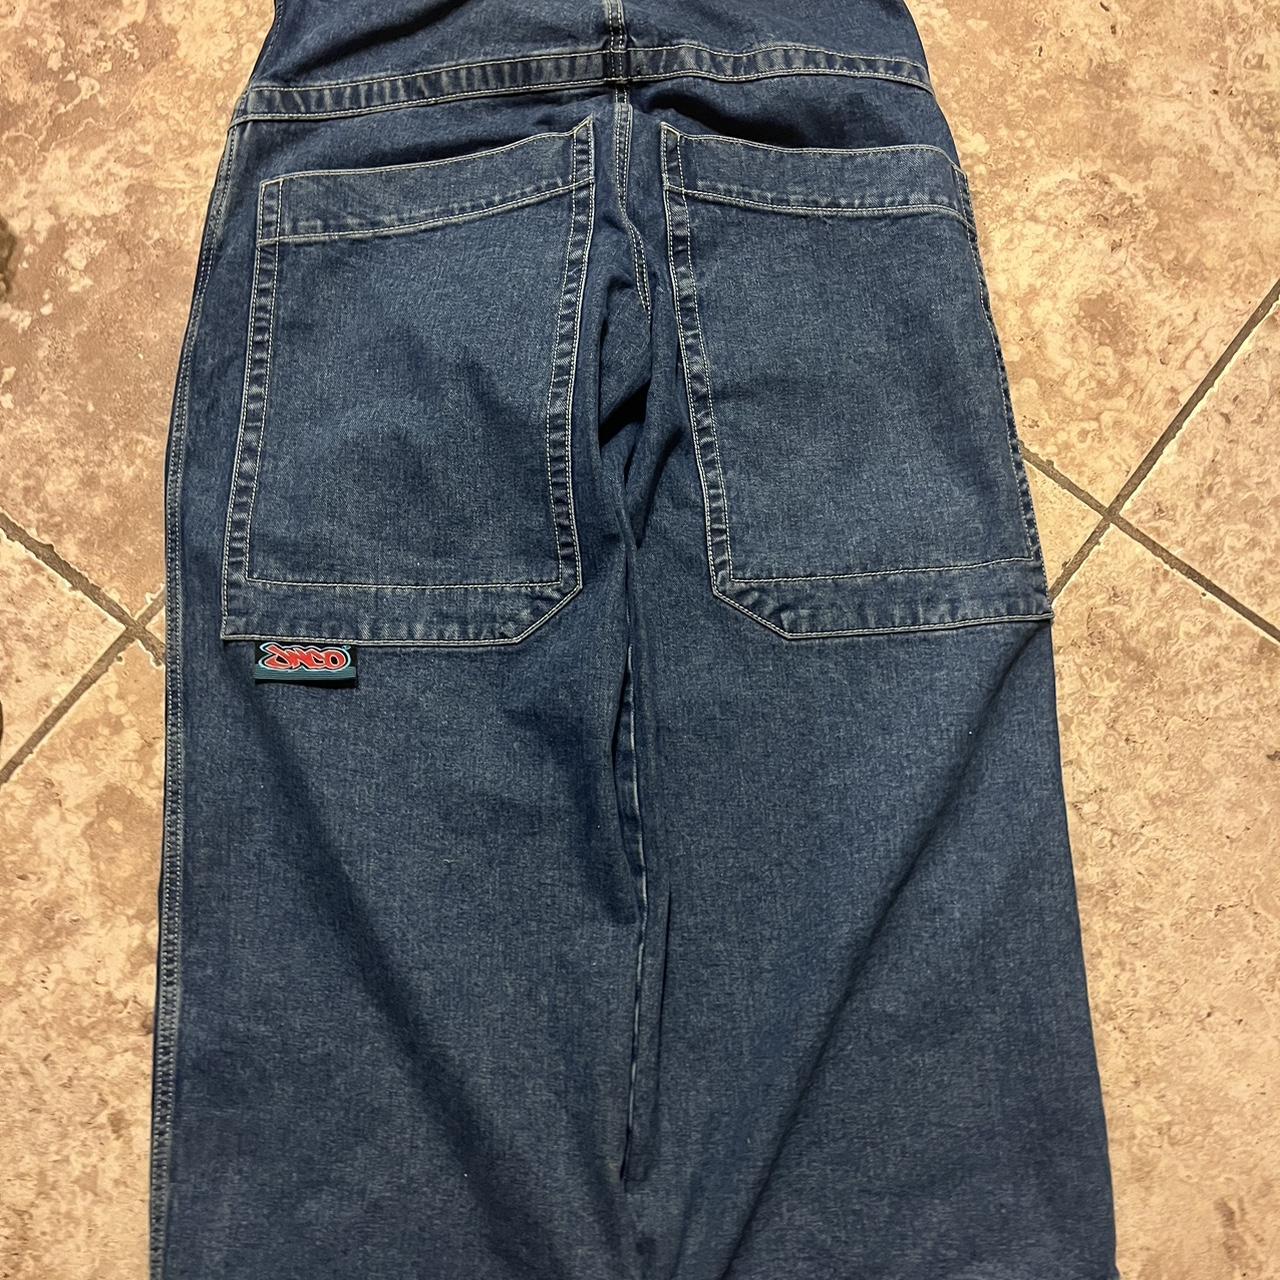 JNCO JEANS Lul calm Jeans Not real price ... - Depop